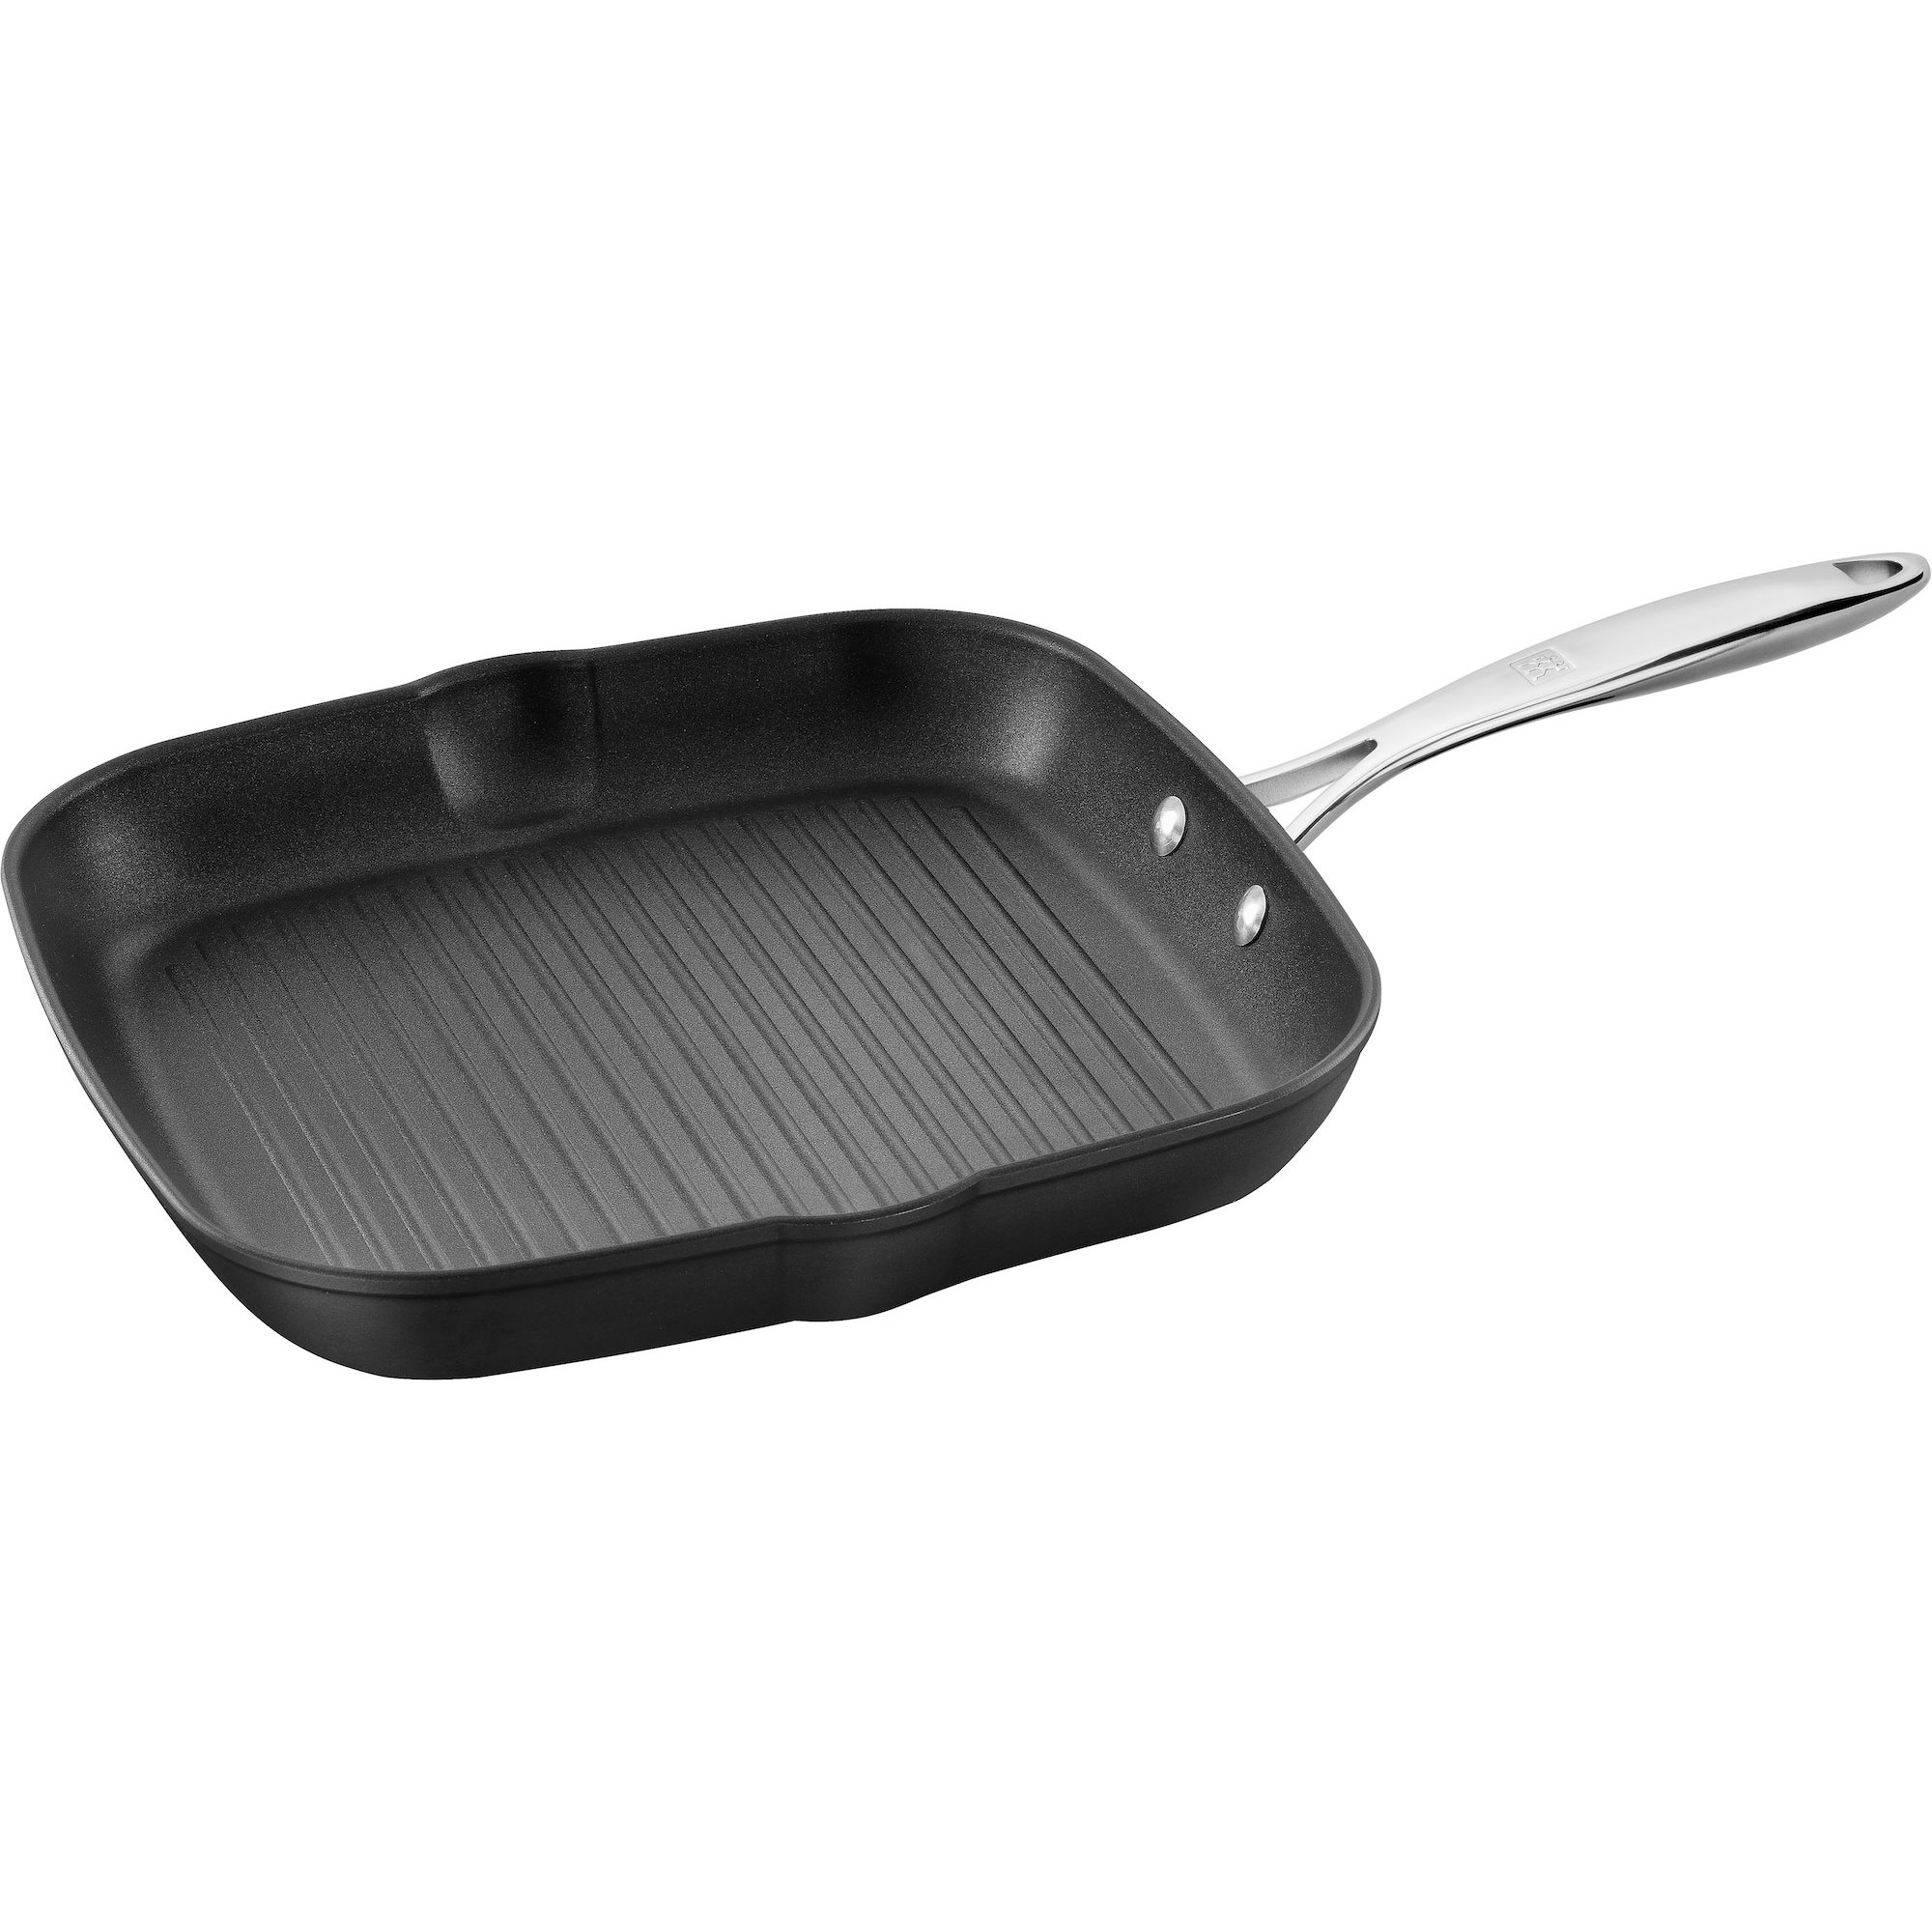 Zwilling Forte grillpande 28 cm.